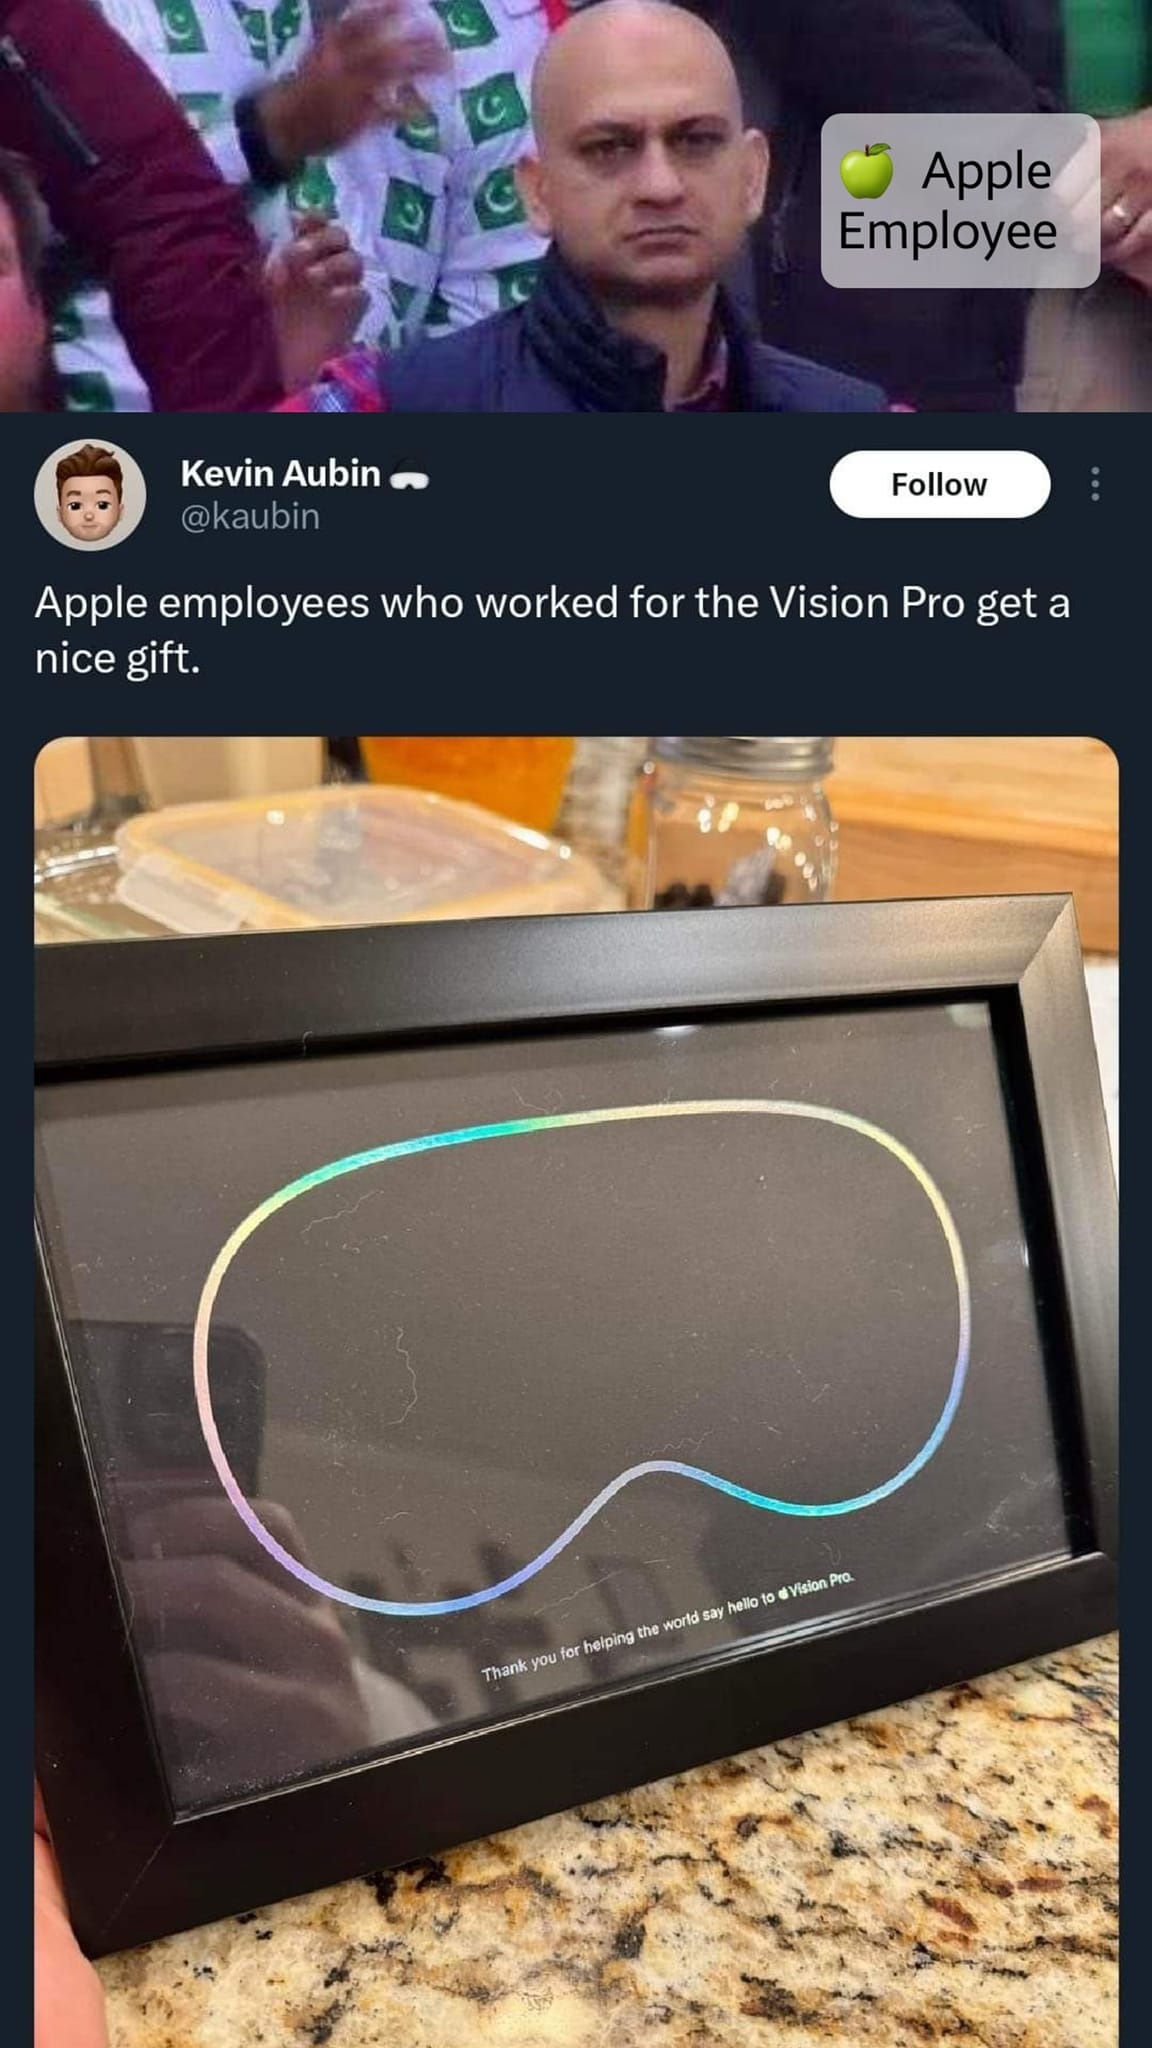 Apple employees who worked for the Vision pro get a nice gift